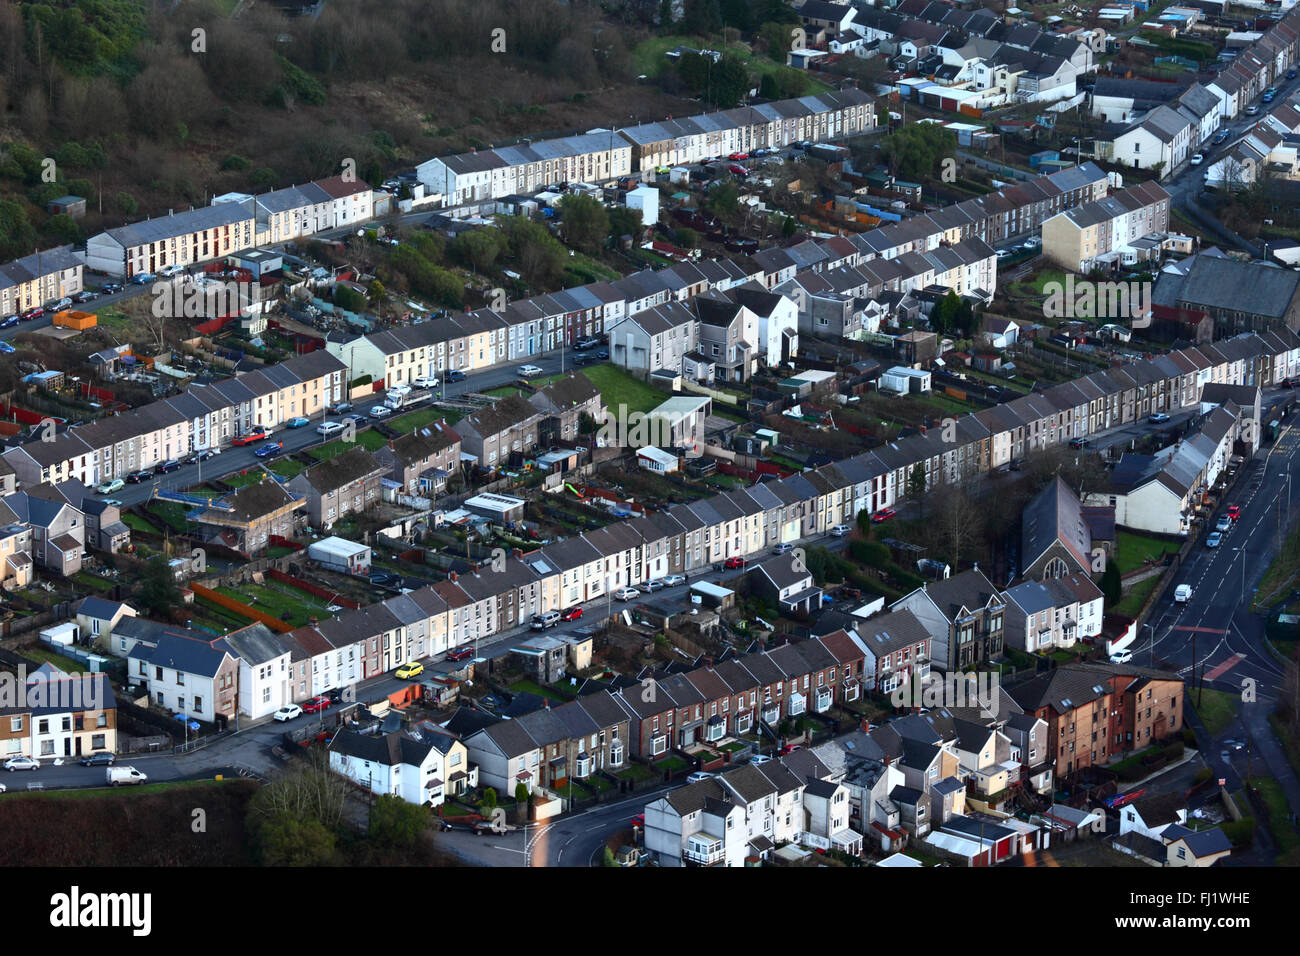 Aerial view of typical terraced cottages in Treherbert, Rhondda Fawr valley, Mid Glamorgan, Wales, United Kingdom Stock Photo